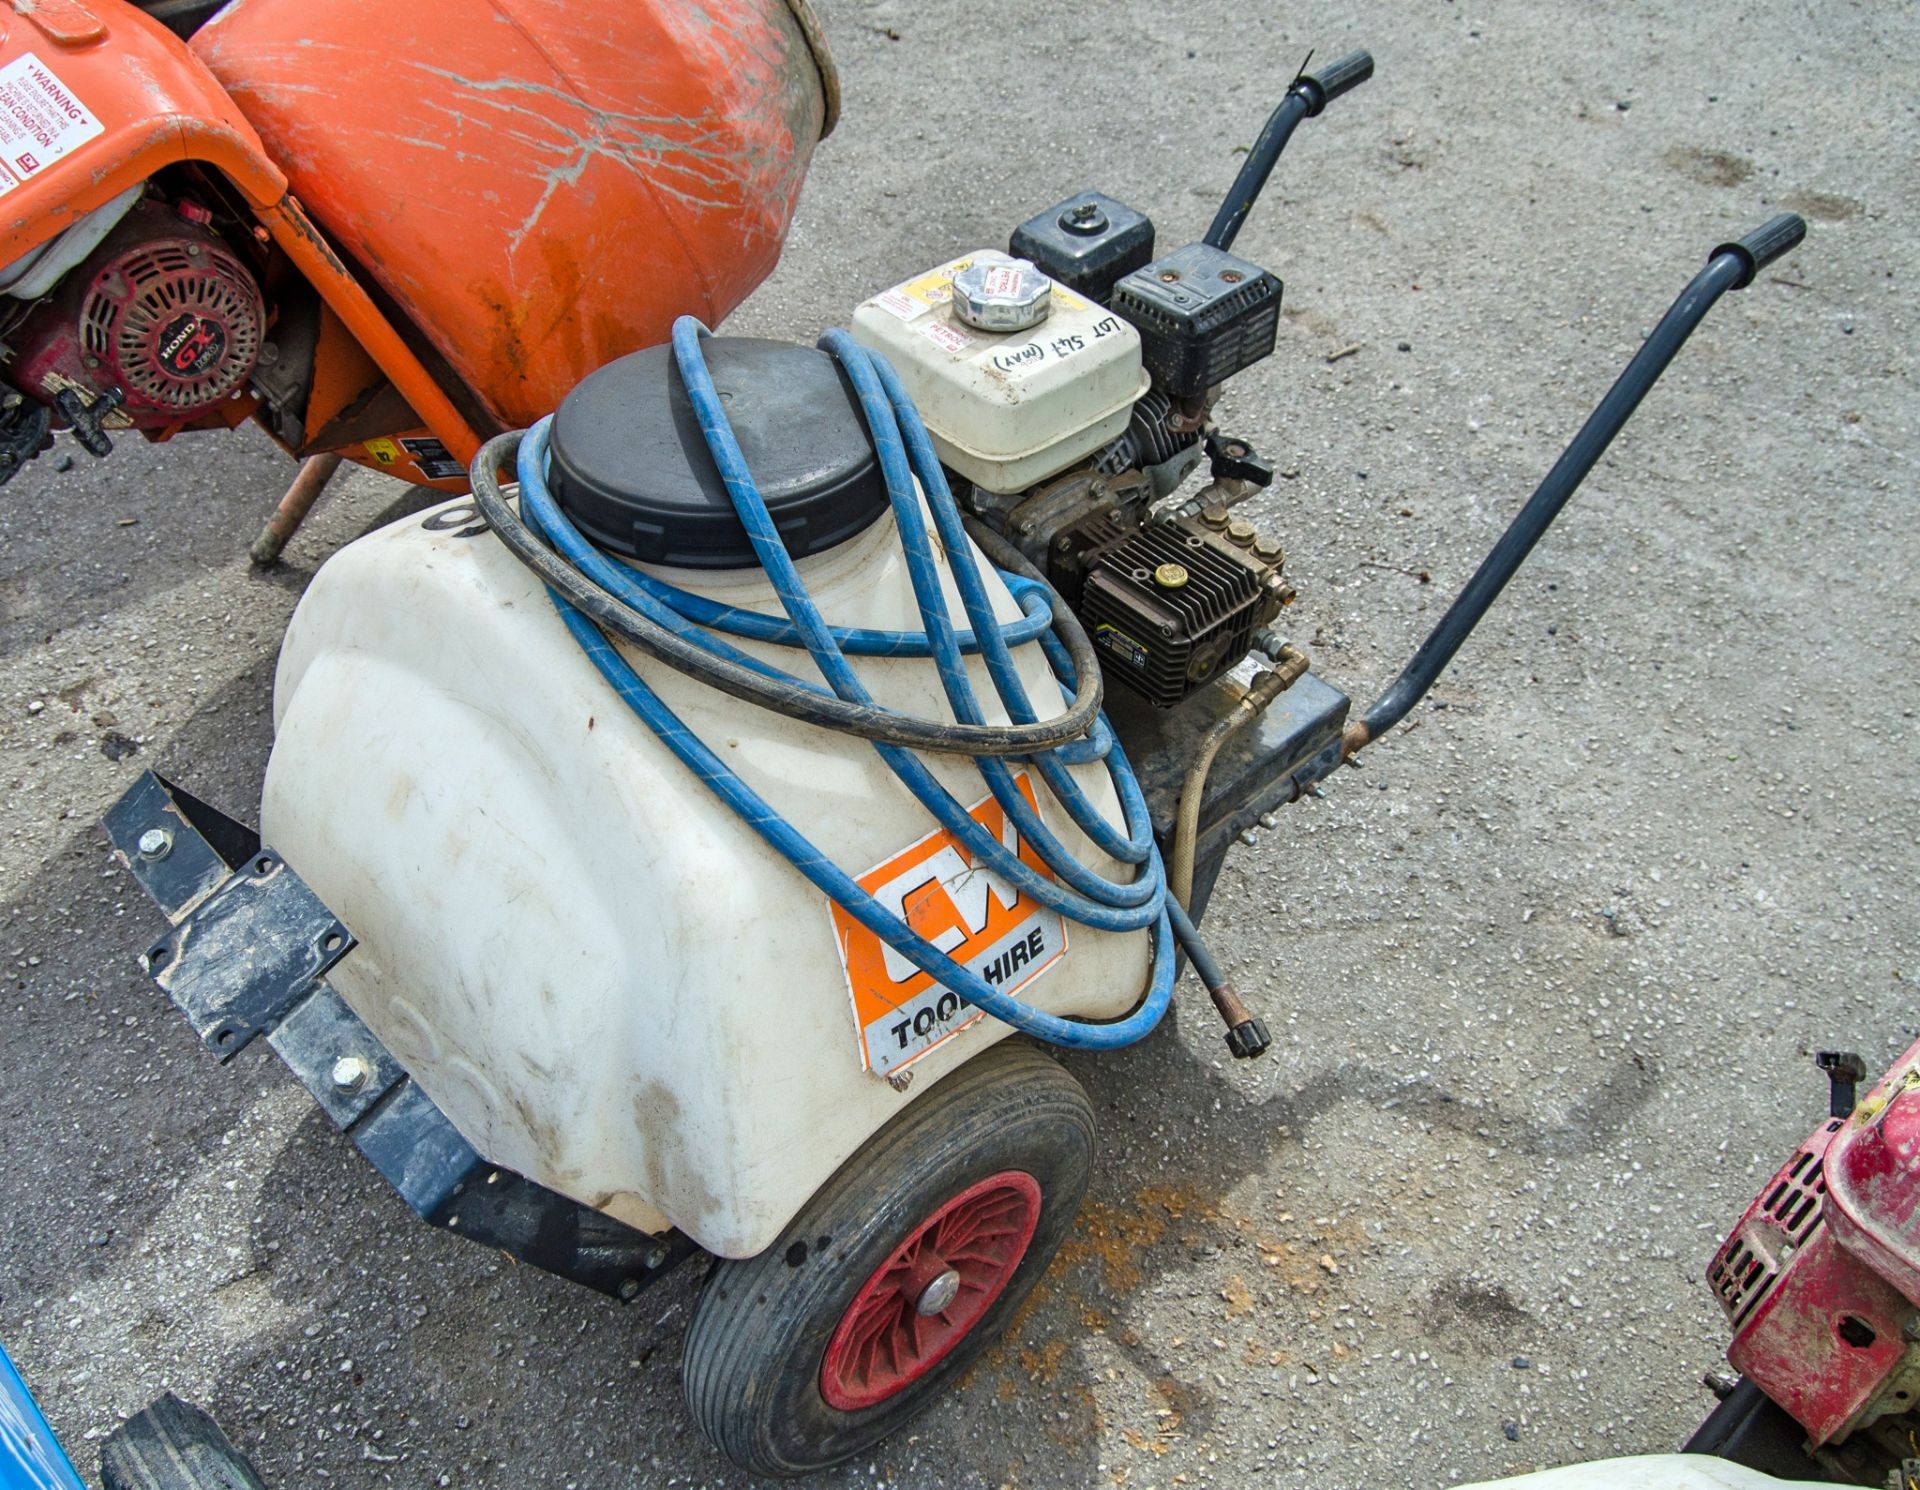 Taskman petrol driven pressure washer bowser c/w hose 51106 ** No lance & pull cord missing ** - Image 2 of 3